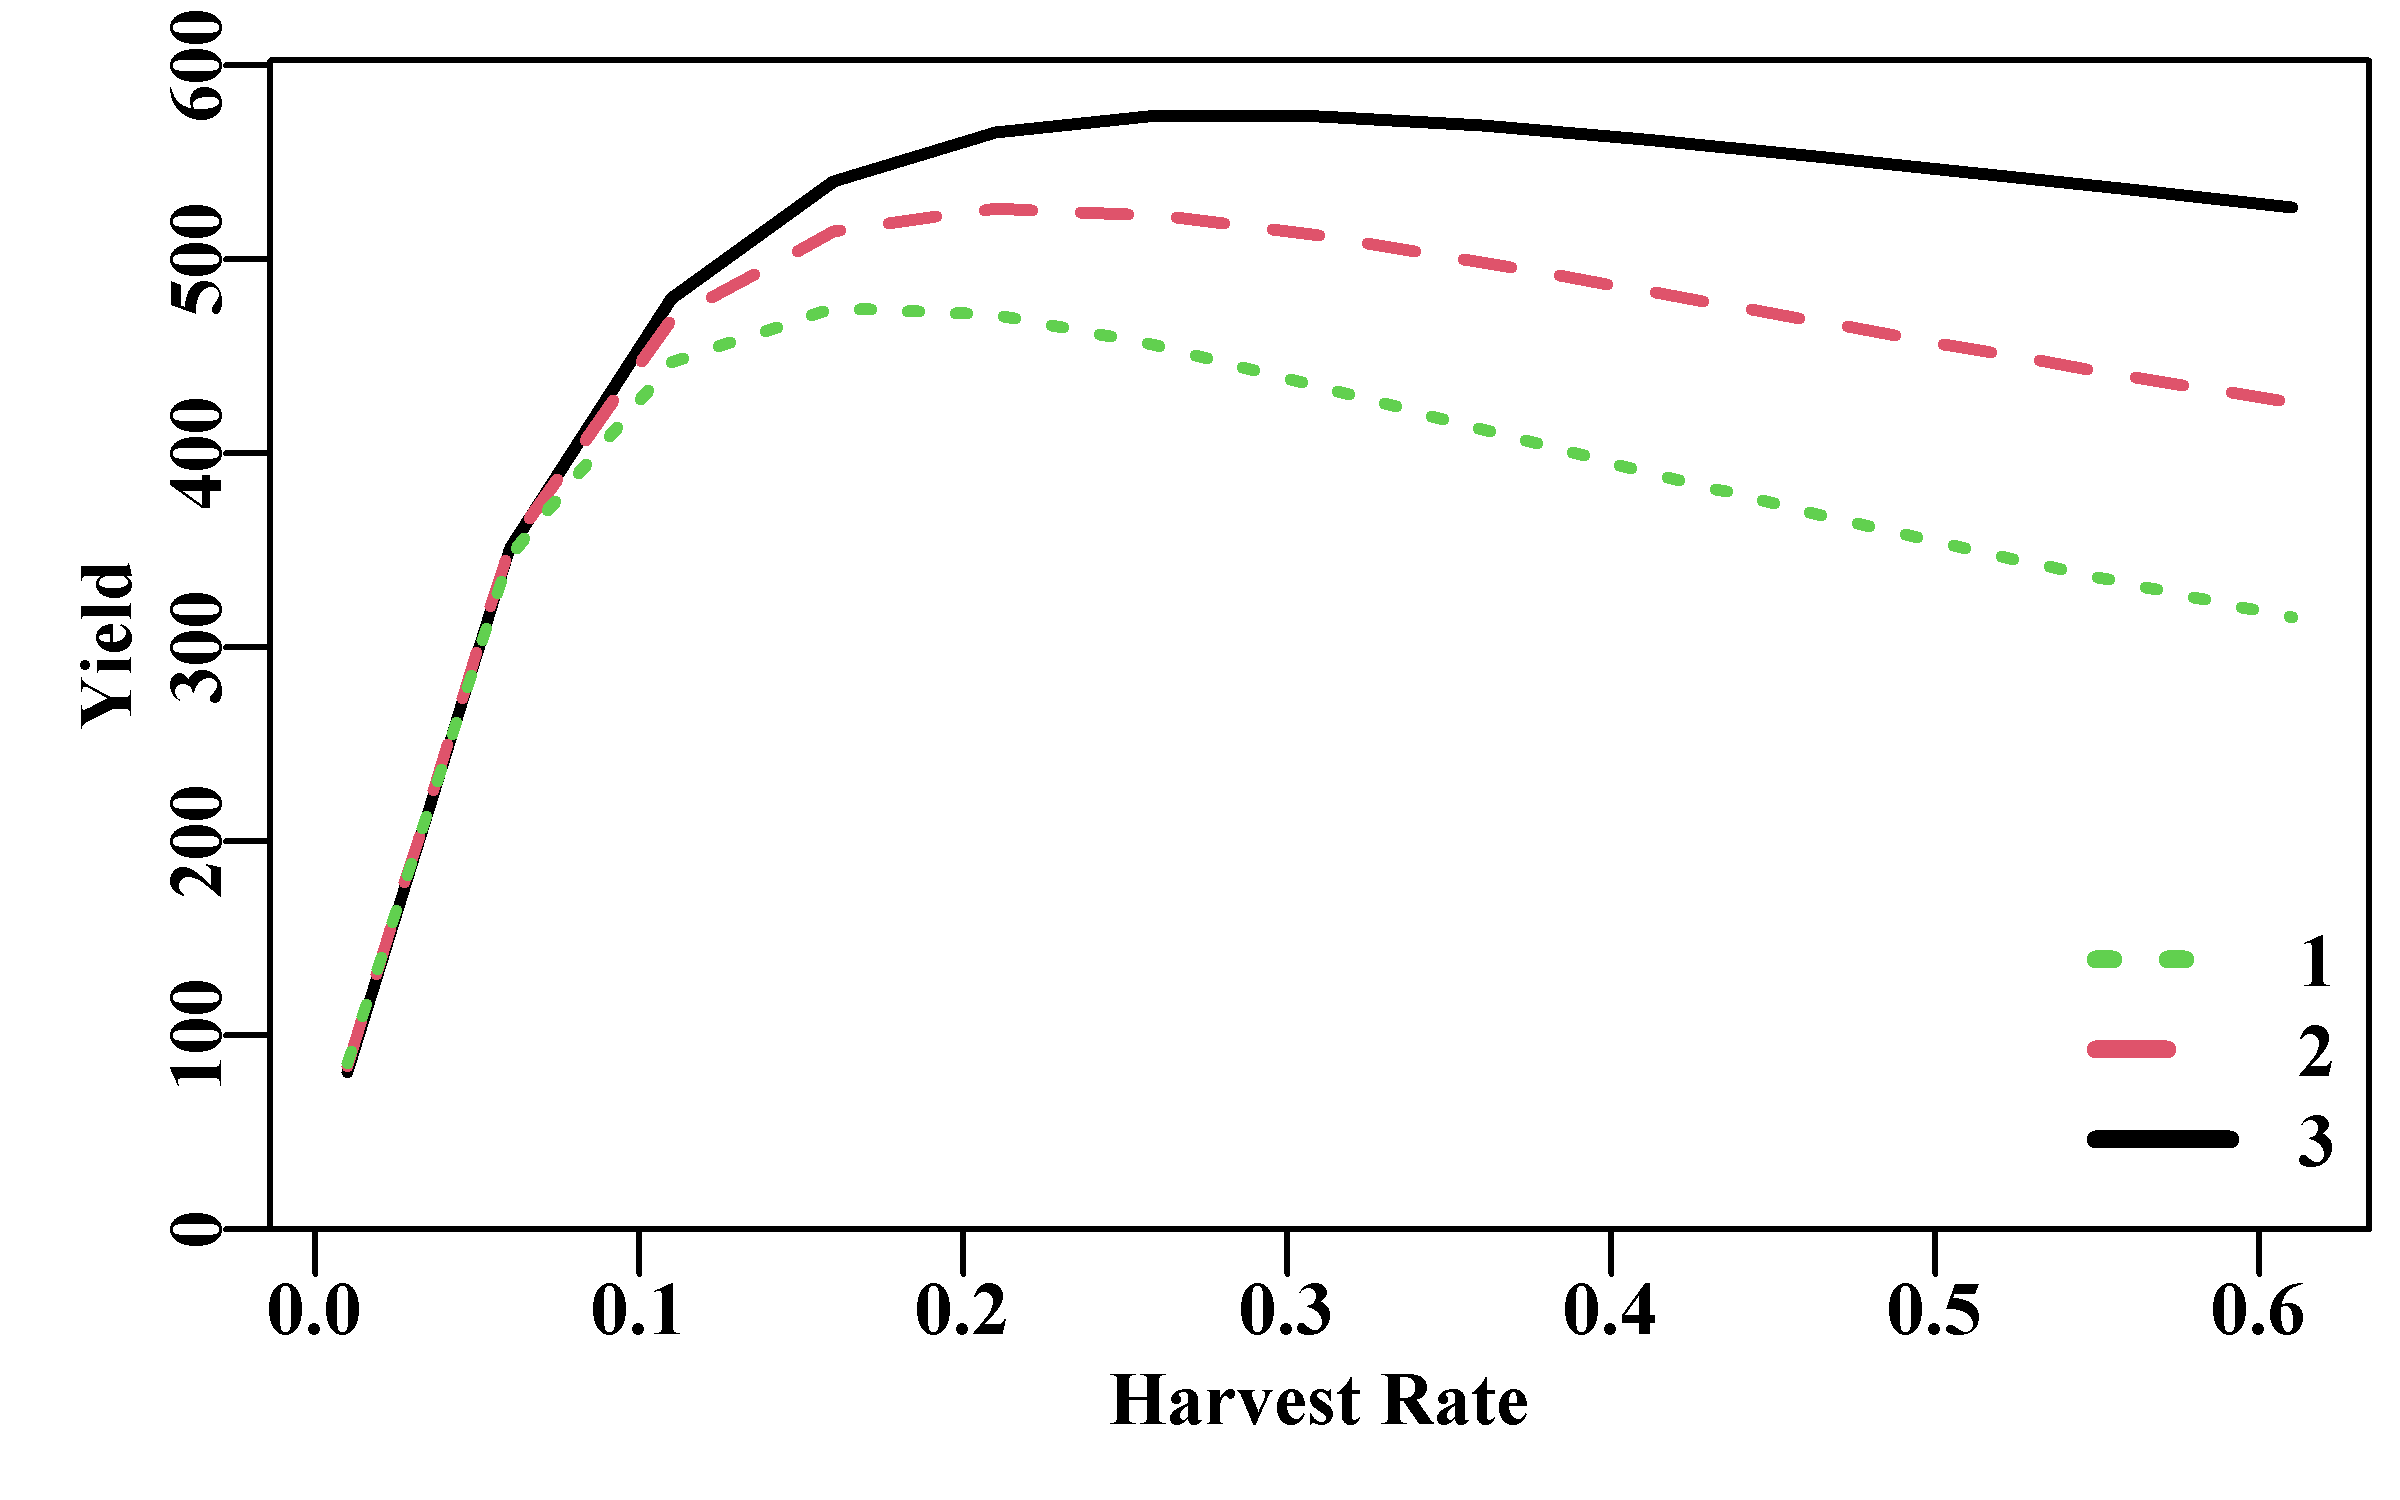 The effect on the total equilibrium yield of applying different harvest rates and different ages of first exploitation. The legend identifies the different age of first exploitation.